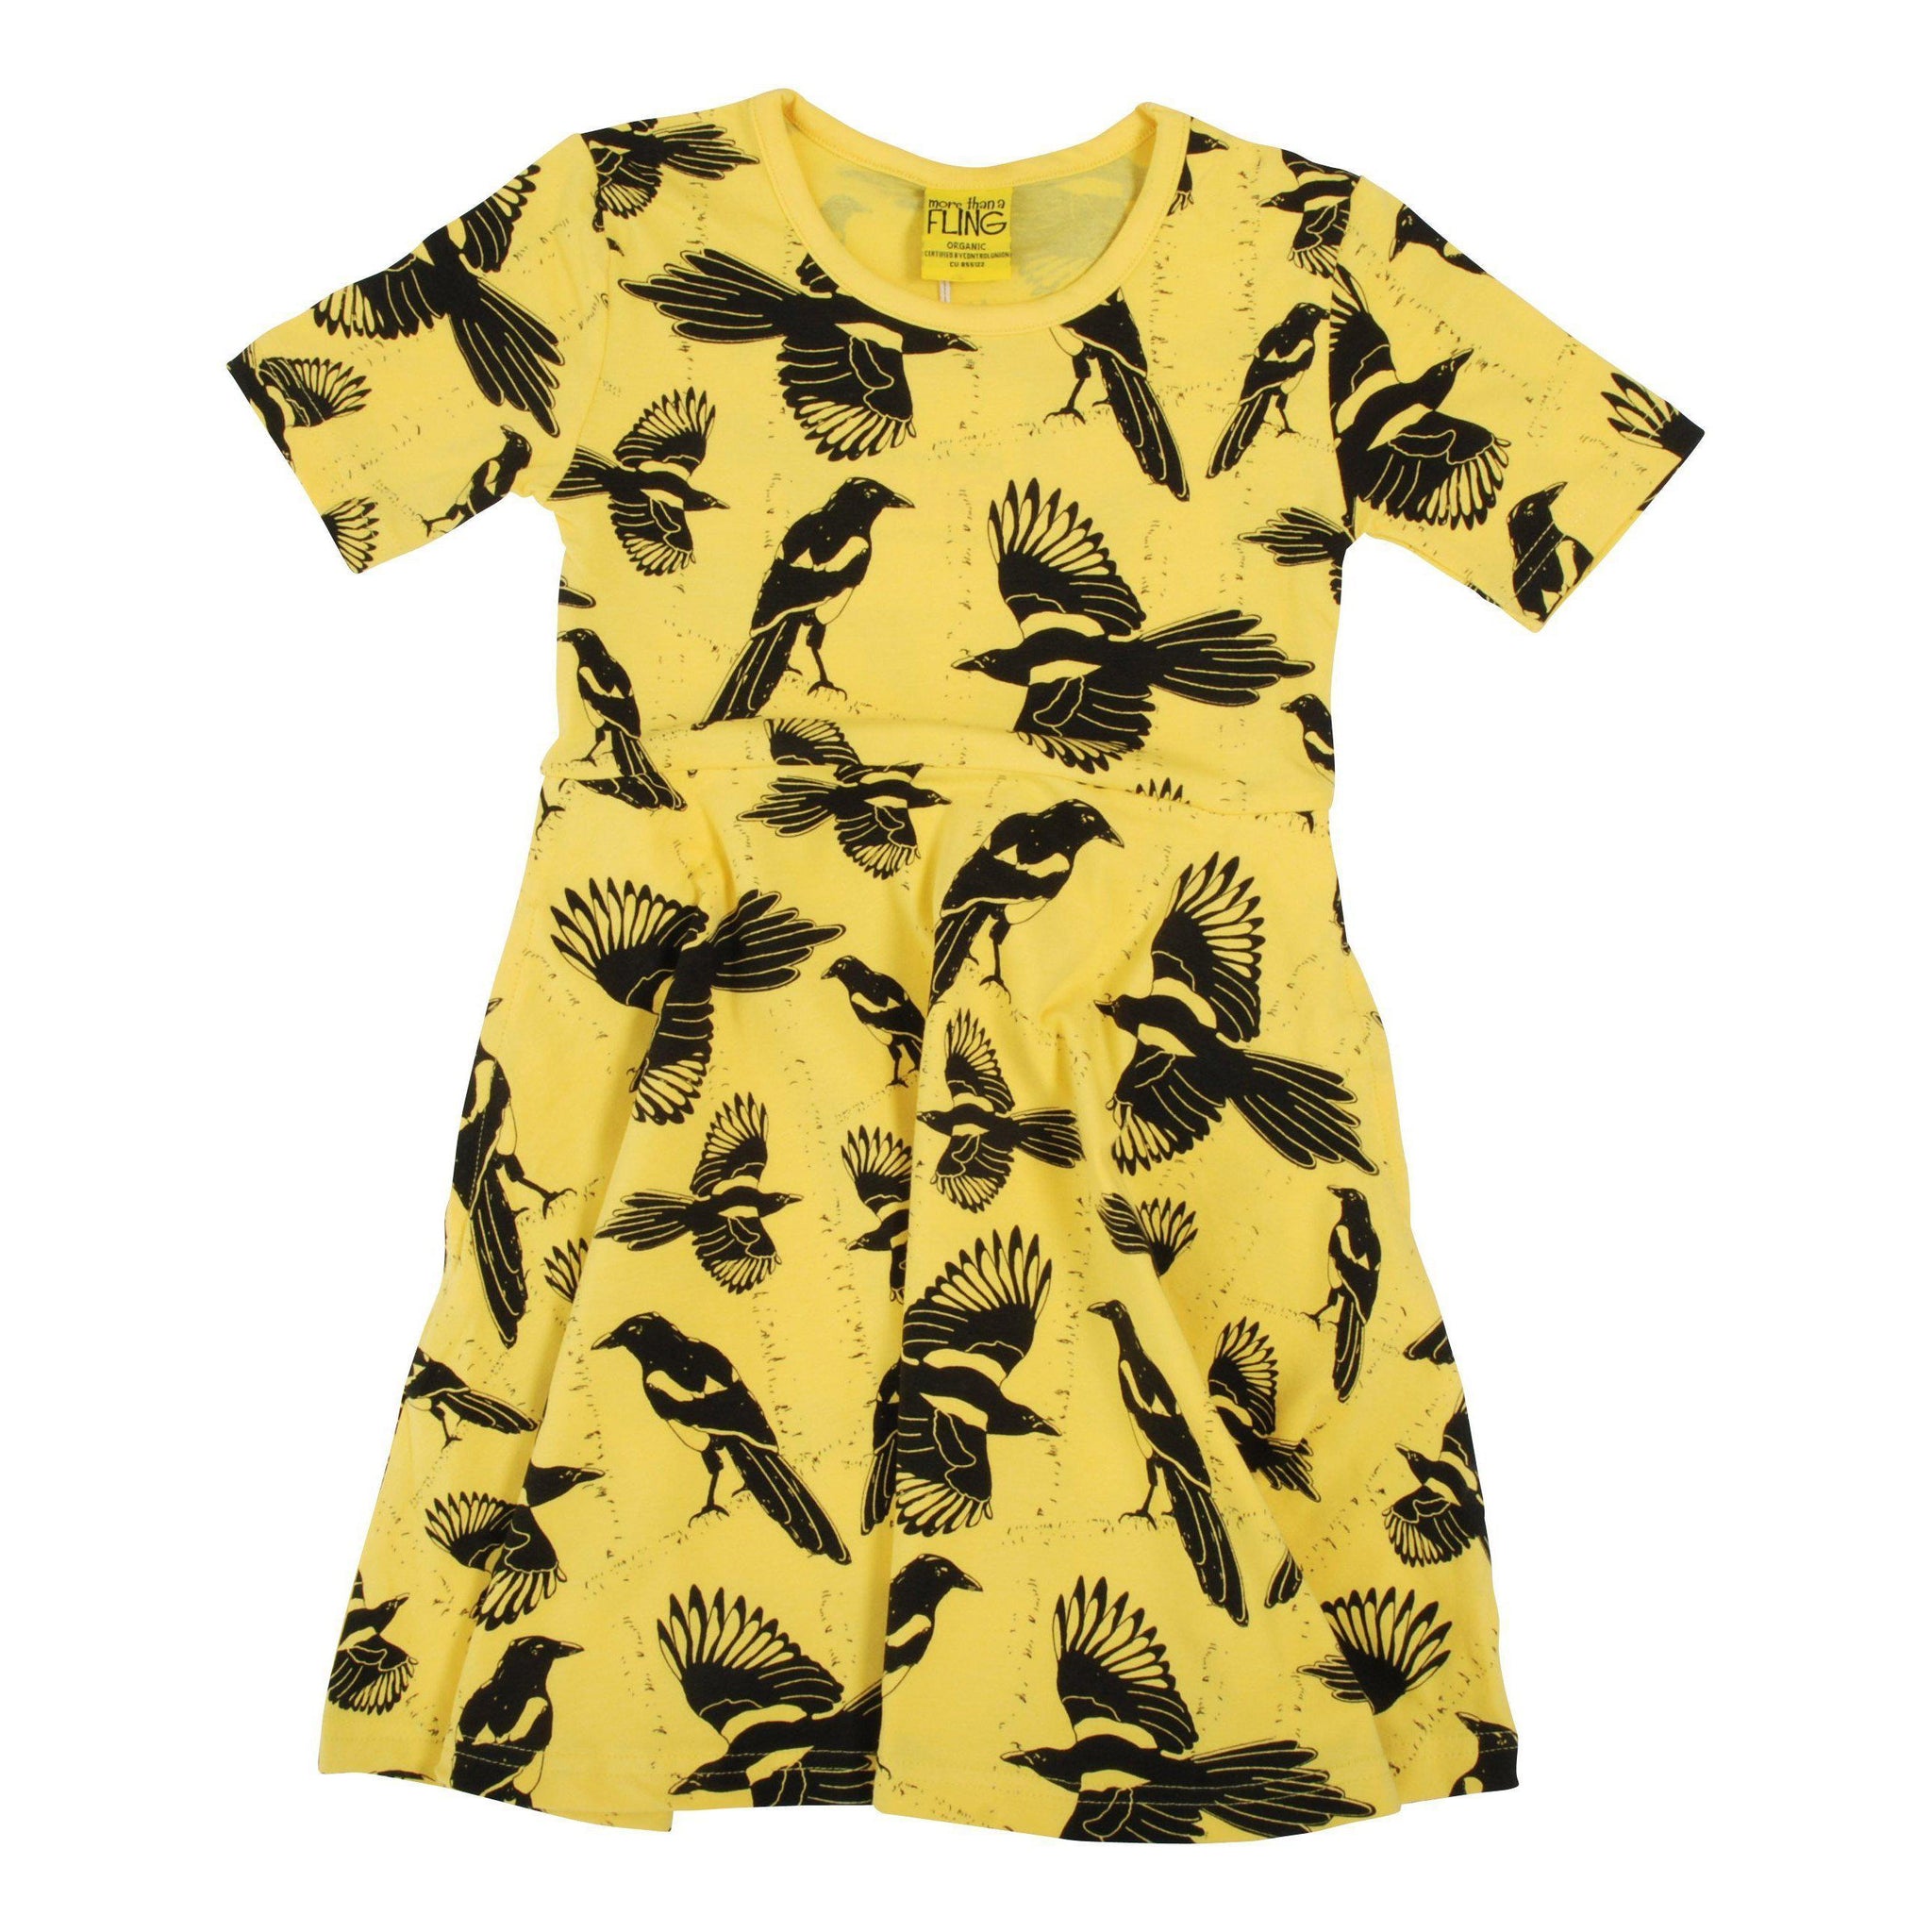 More than a Fling - Pica Pica Skater Dress (Aspen Gold) (2 Years)